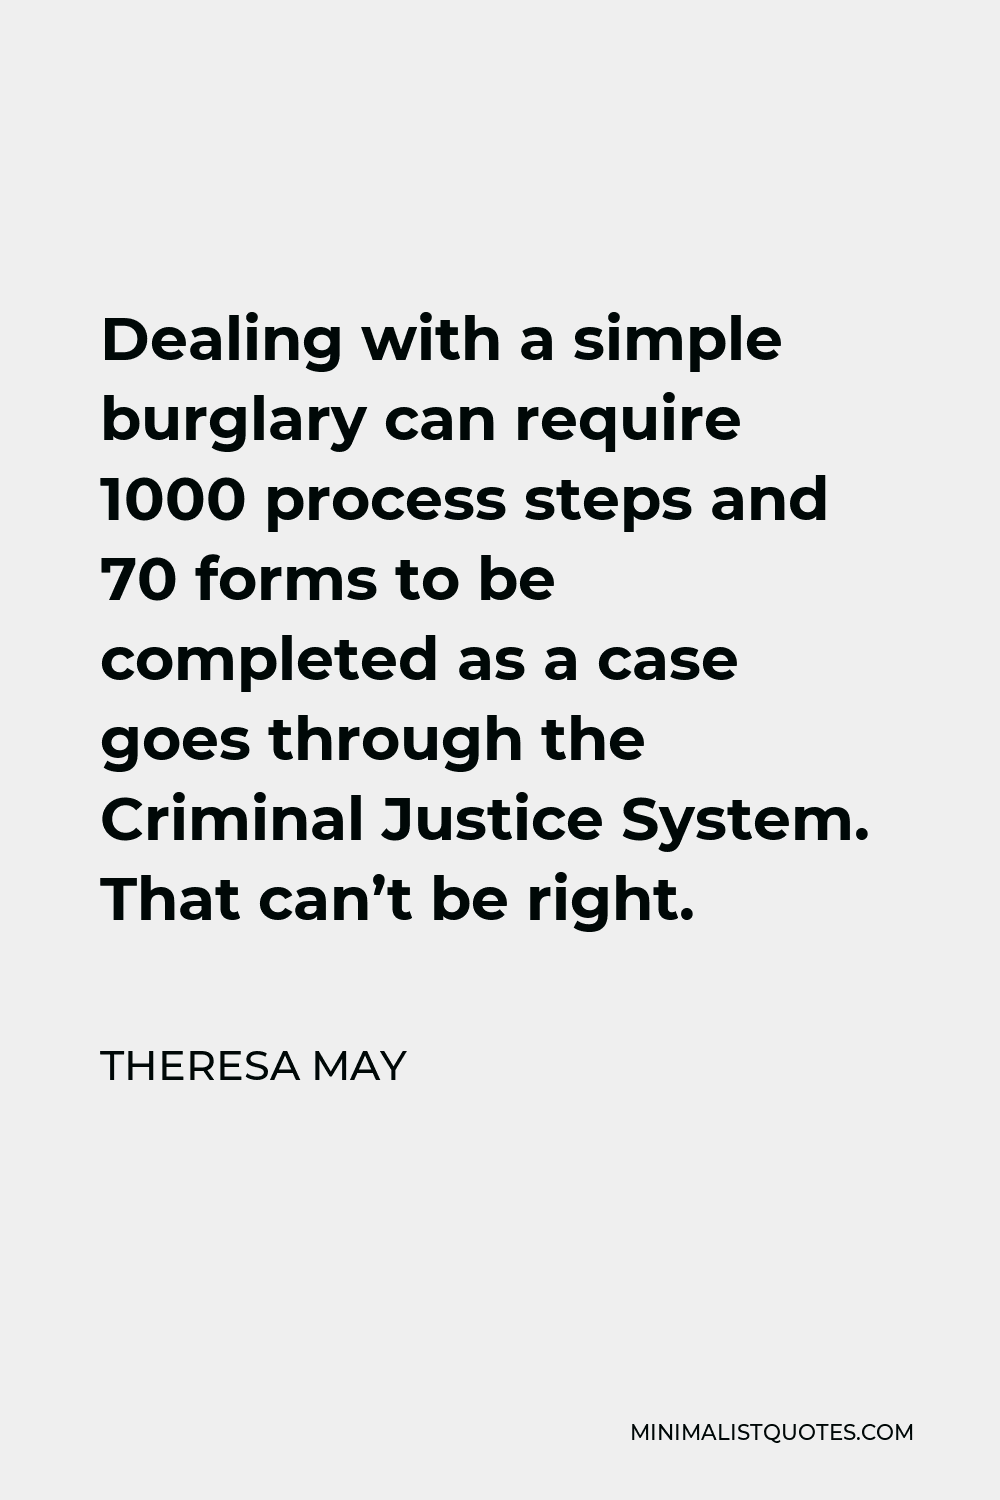 Theresa May Quote - Dealing with a simple burglary can require 1000 process steps and 70 forms to be completed as a case goes through the Criminal Justice System. That can’t be right.